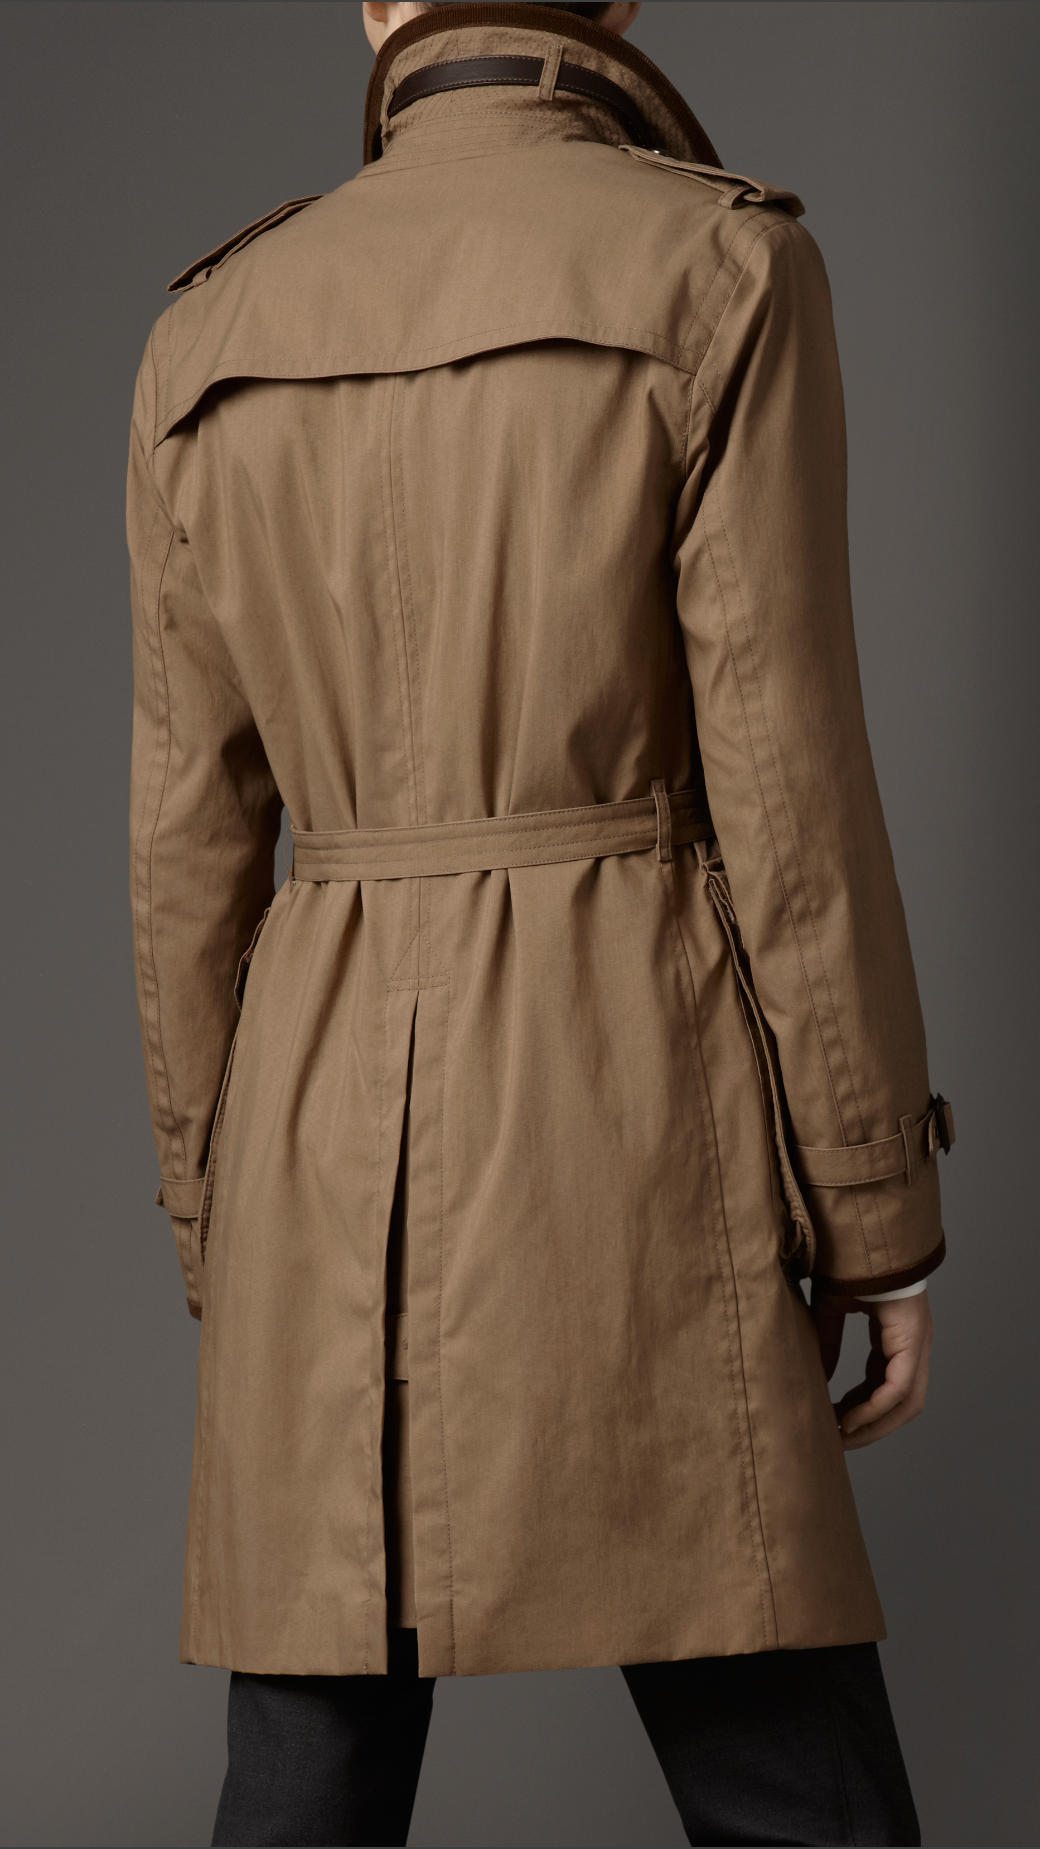 Lyst - Burberry Waxed Cotton Canvas Car Coat in Natural for Men